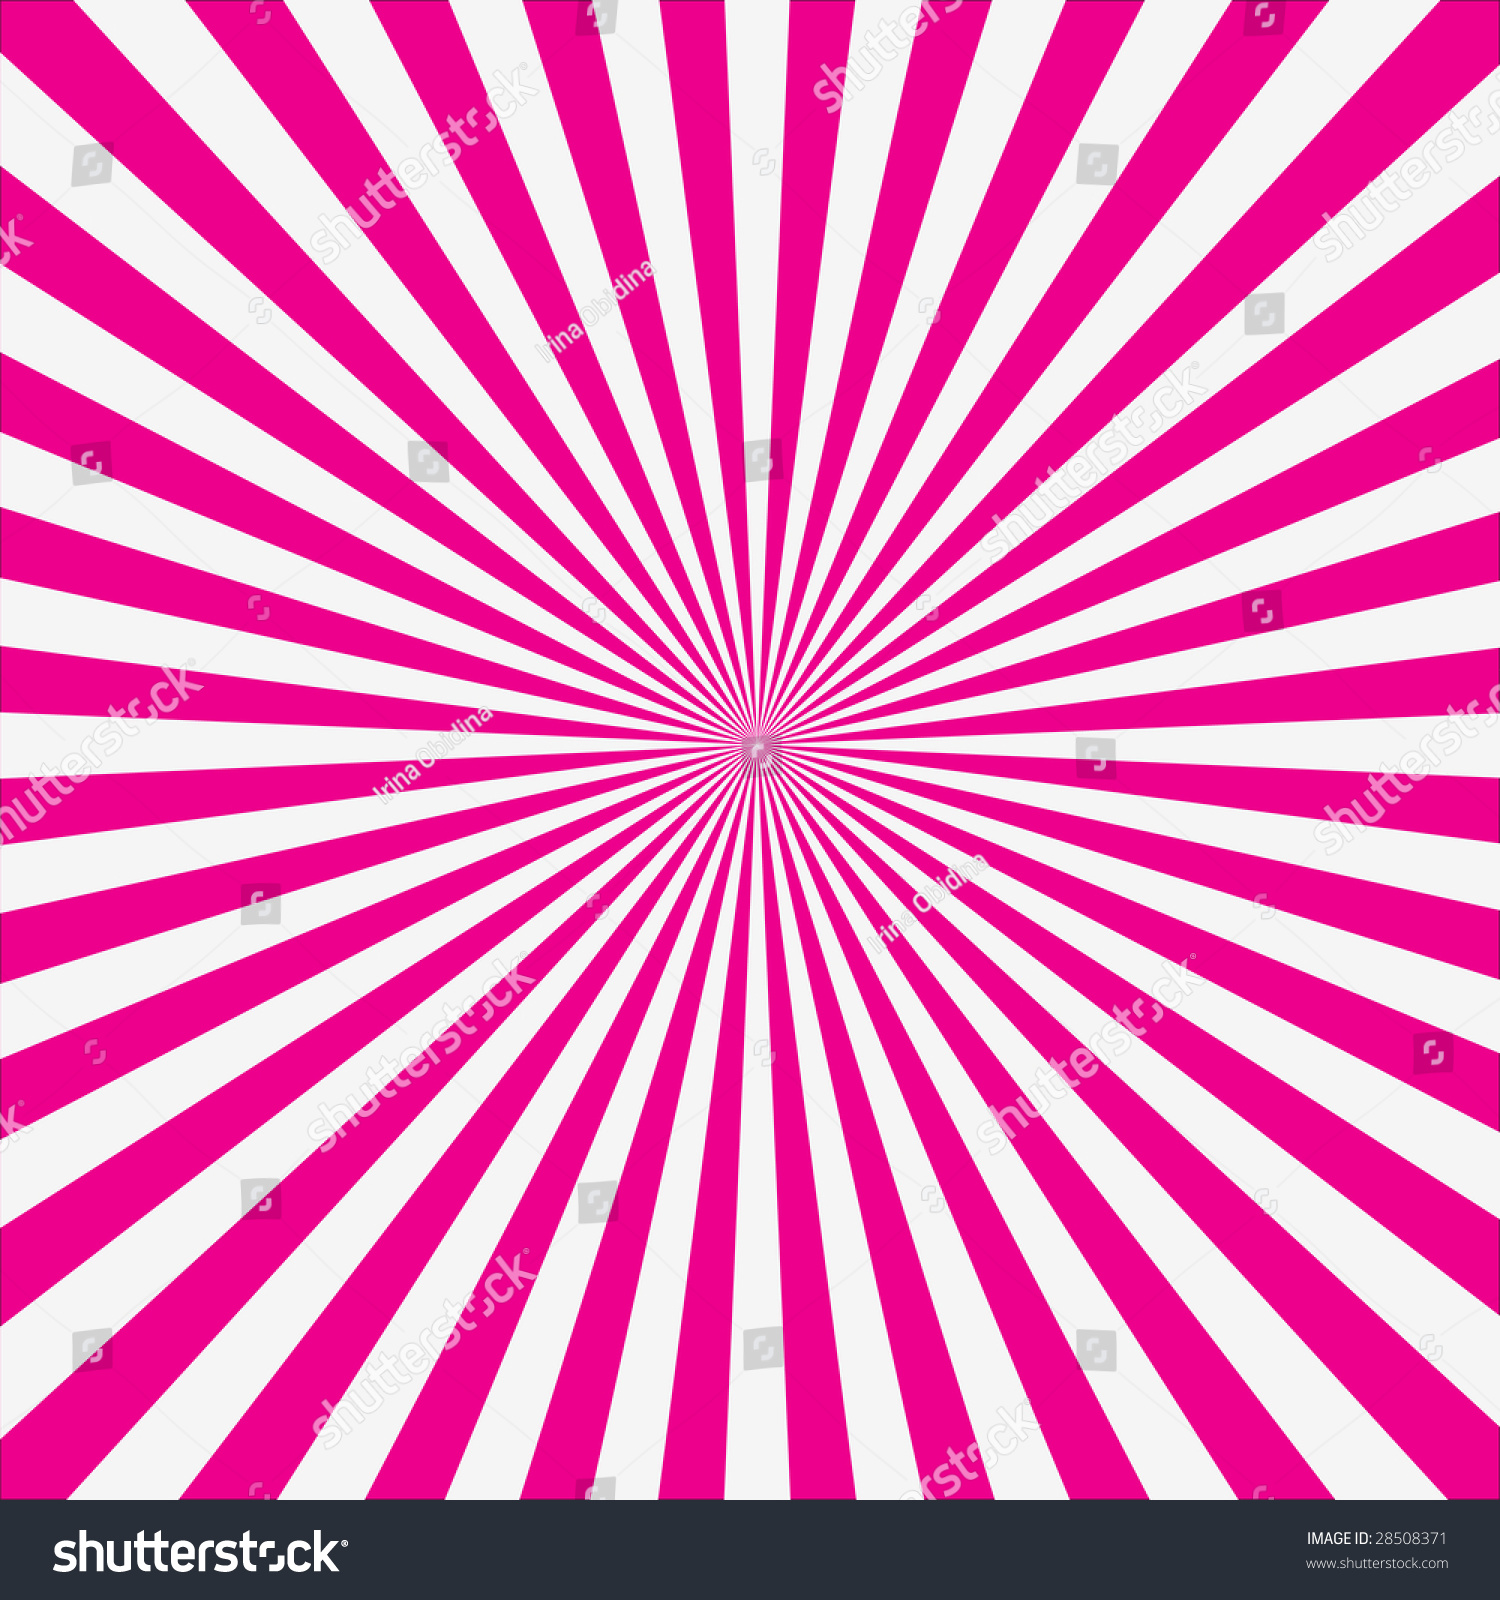 Vector Pink Retro Burst Abstract Background Stock Vector (Royalty Free ...